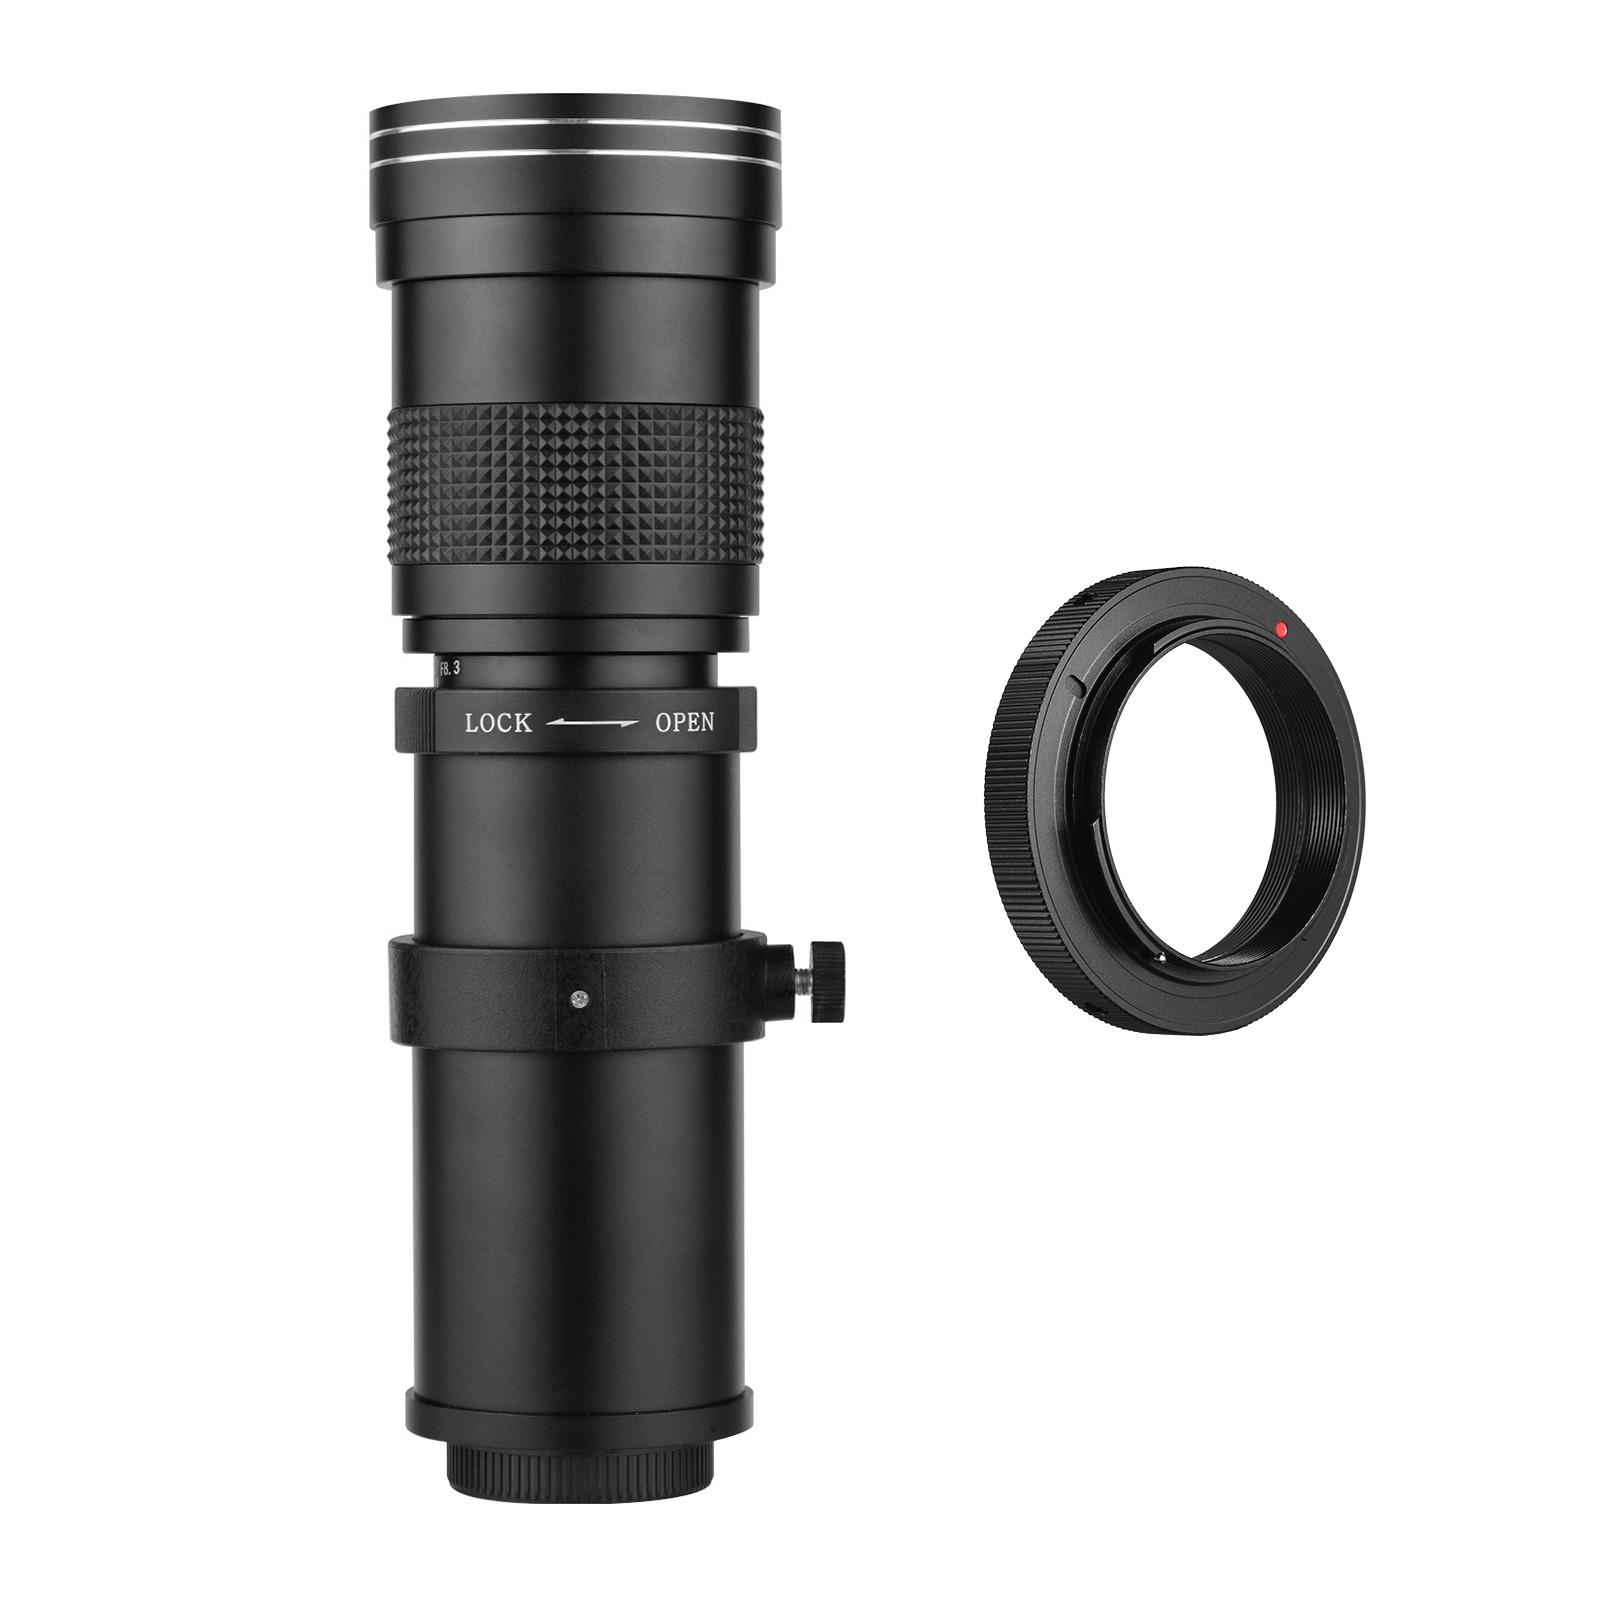 Camera MF Super Telephoto Zoom Lens F/8.3-16 420-800mm T2 Mount with AI-mount Adapter Ring Universal 1/4 Thread